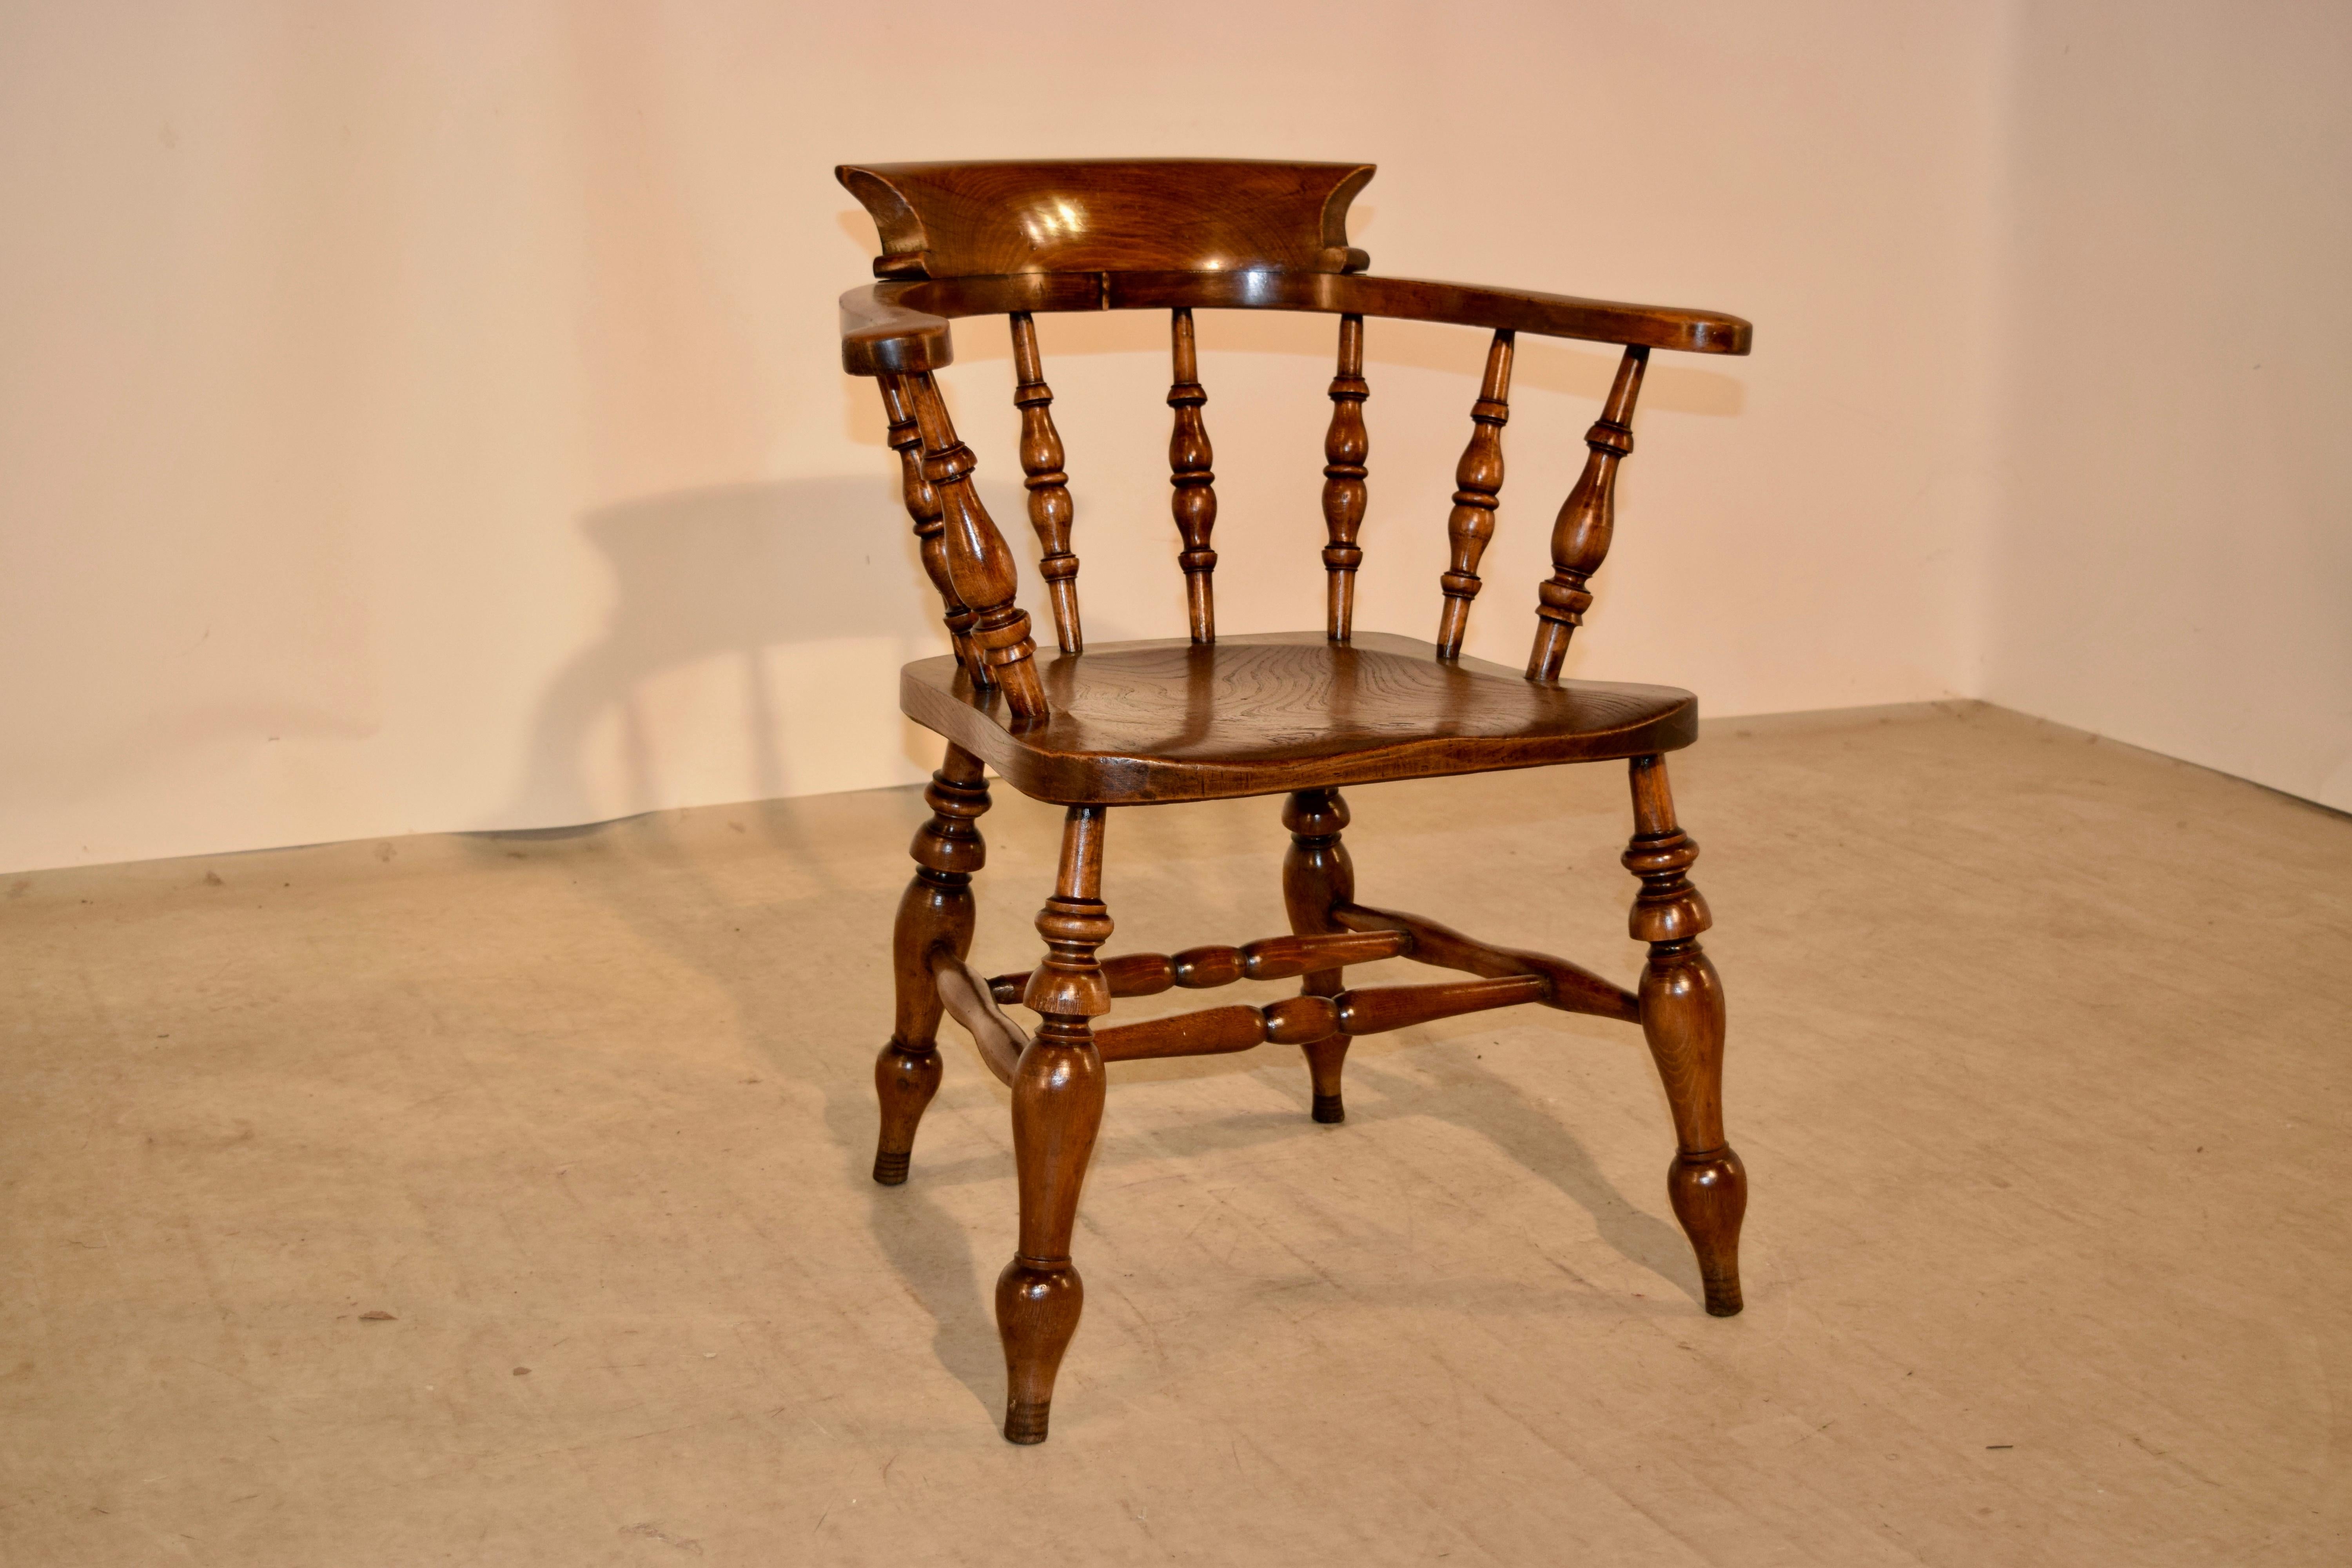 19th century English captain's chair with a shaped back and hand-turned spindles for a very comfortable seat. The chair seat is made of elm as well, and the entire chair is supported upon hand-turned splayed legs, joined by hand-turned stretchers.